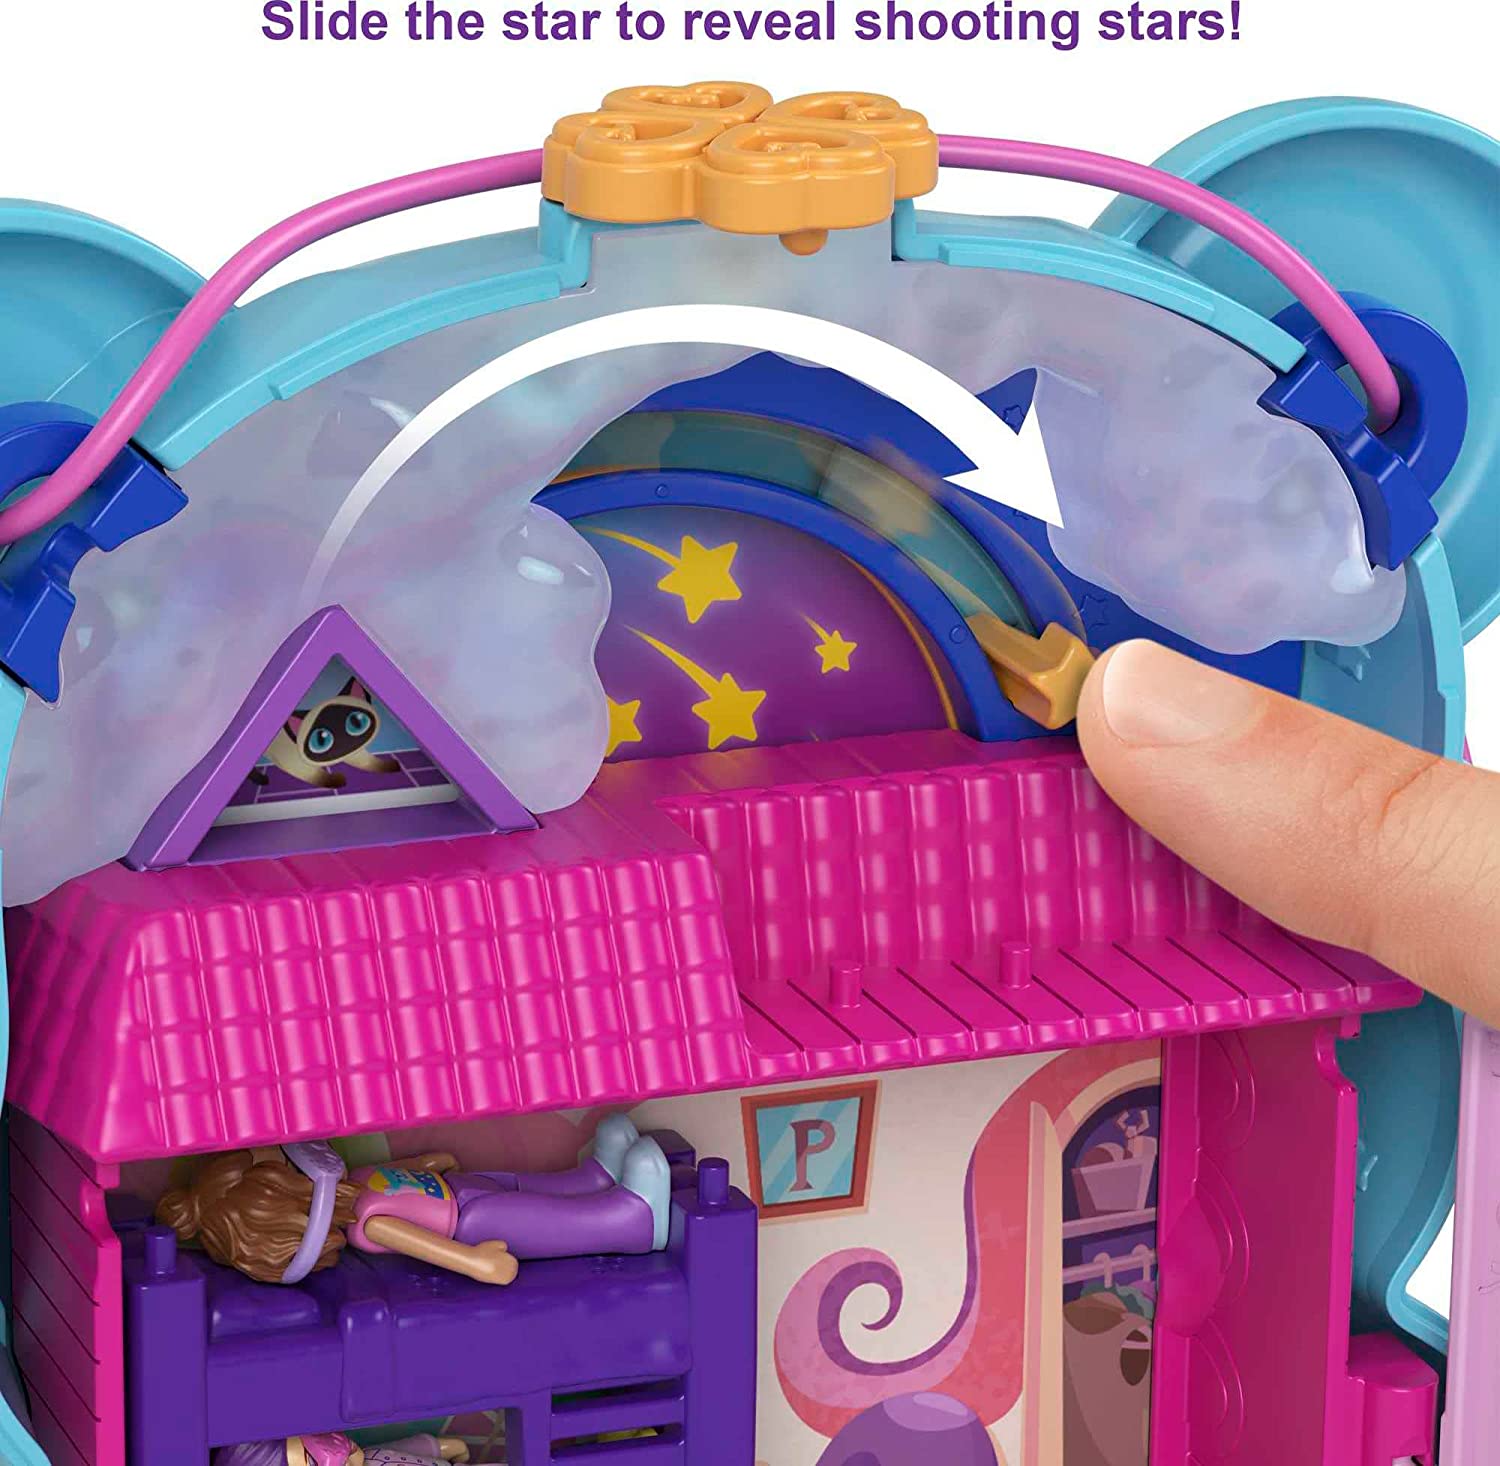 Includes Polly Pocket Teddy Bear Purse compact with 2 micro dolls and 16 accessories. Polly Pocket Teddy Bear Purse Compact, Sleepover Theme with 2 Micro Dolls & 16 Accessories, Pop & Swap Peg Feature, Great Gift for Ages 4 Years Old & Up